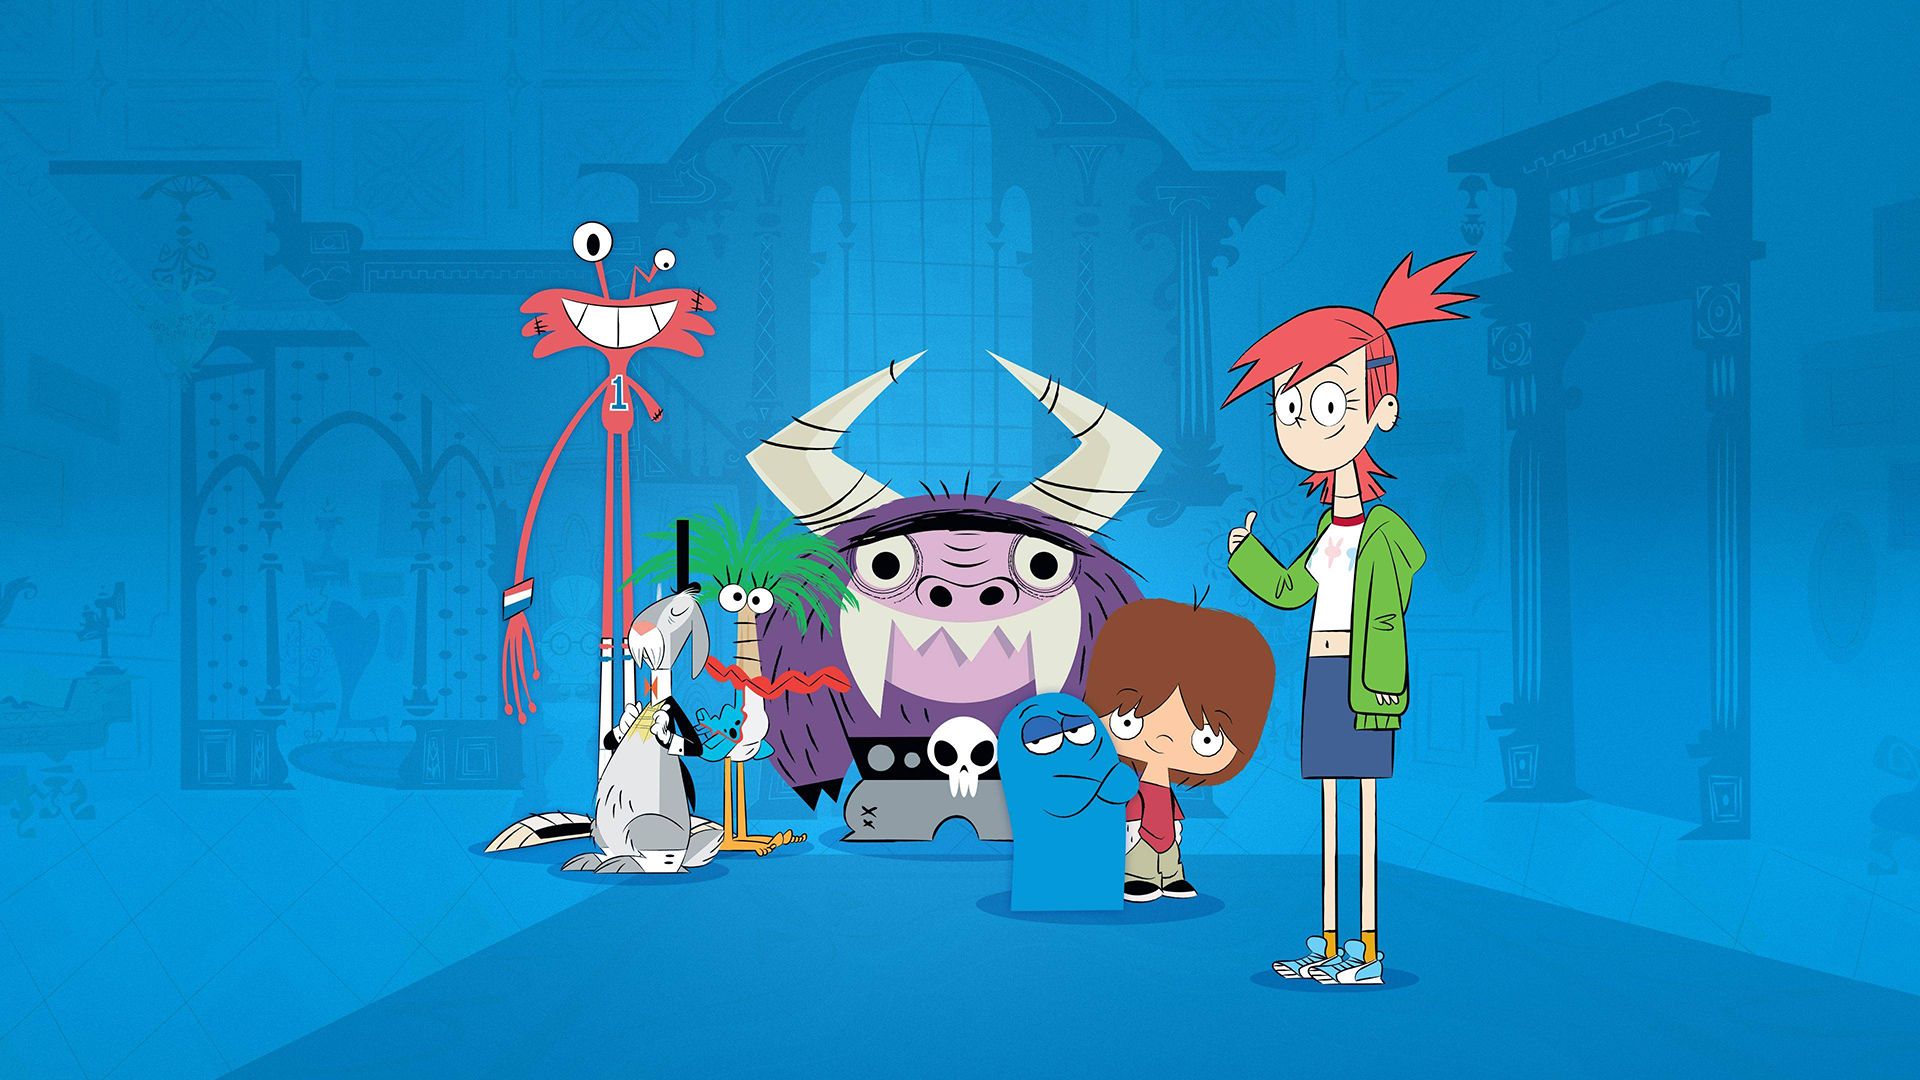 Foster's Home for Imaginary Friends: Destination Imagination background